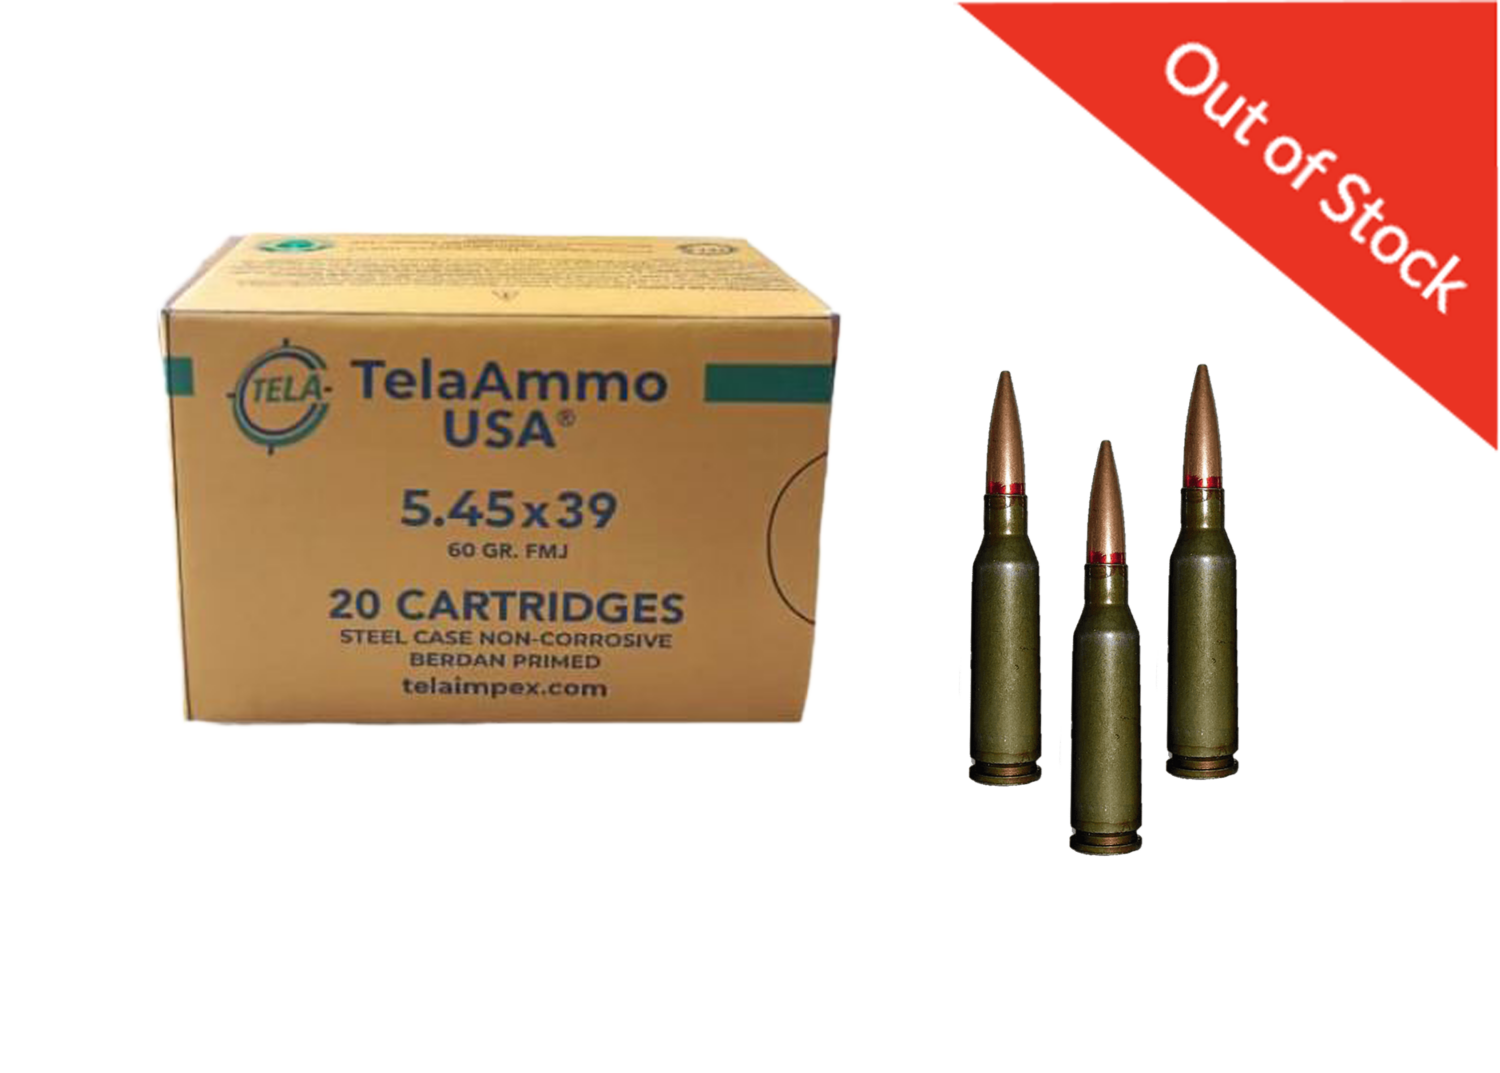 Tela Impex Steel-cased Ammo Available In USA